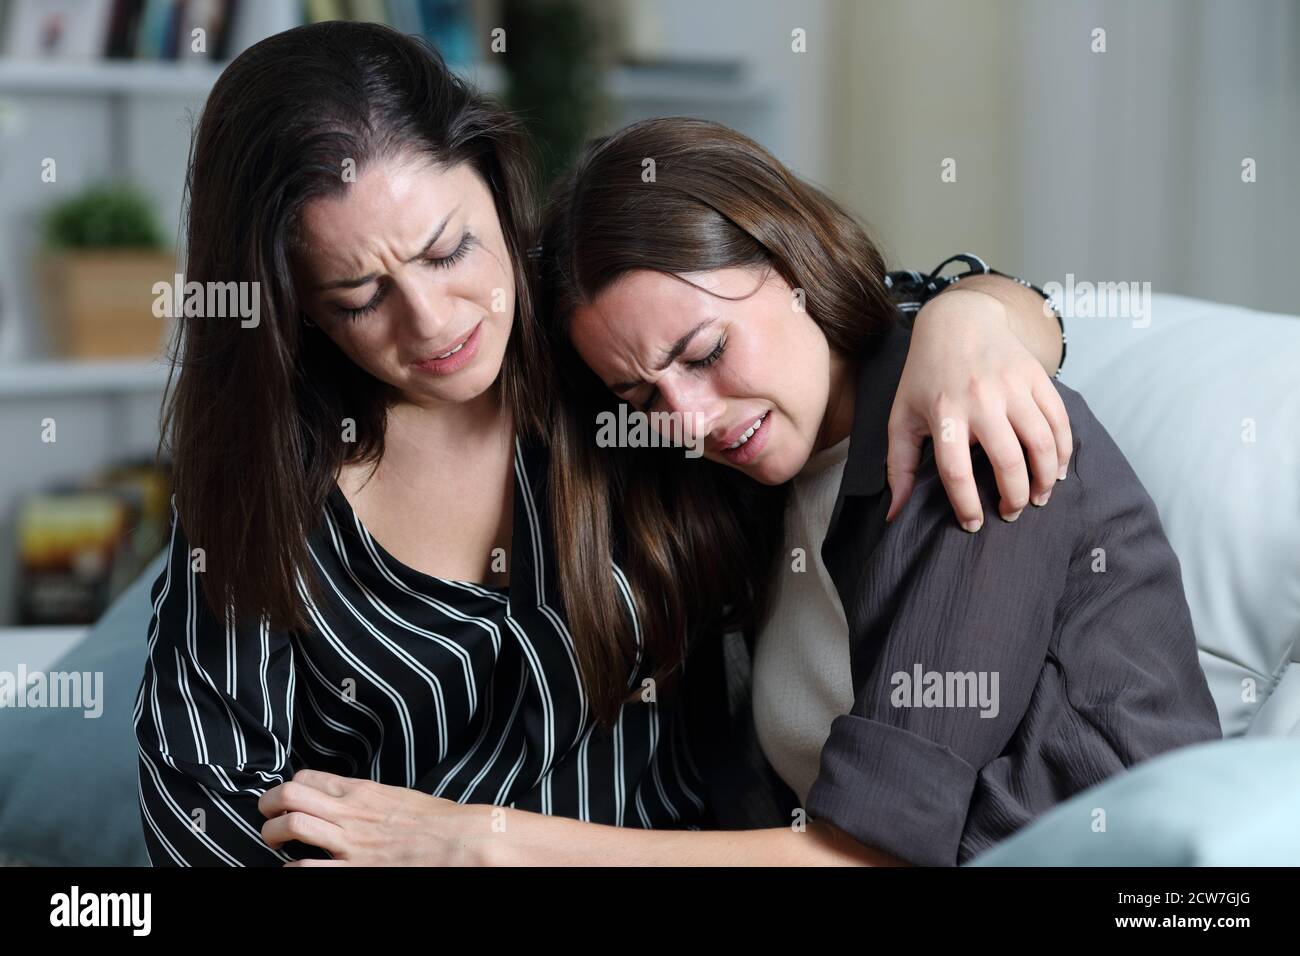 Two sad friends or sisters crying together on a couch in the living room at home Stock Photo